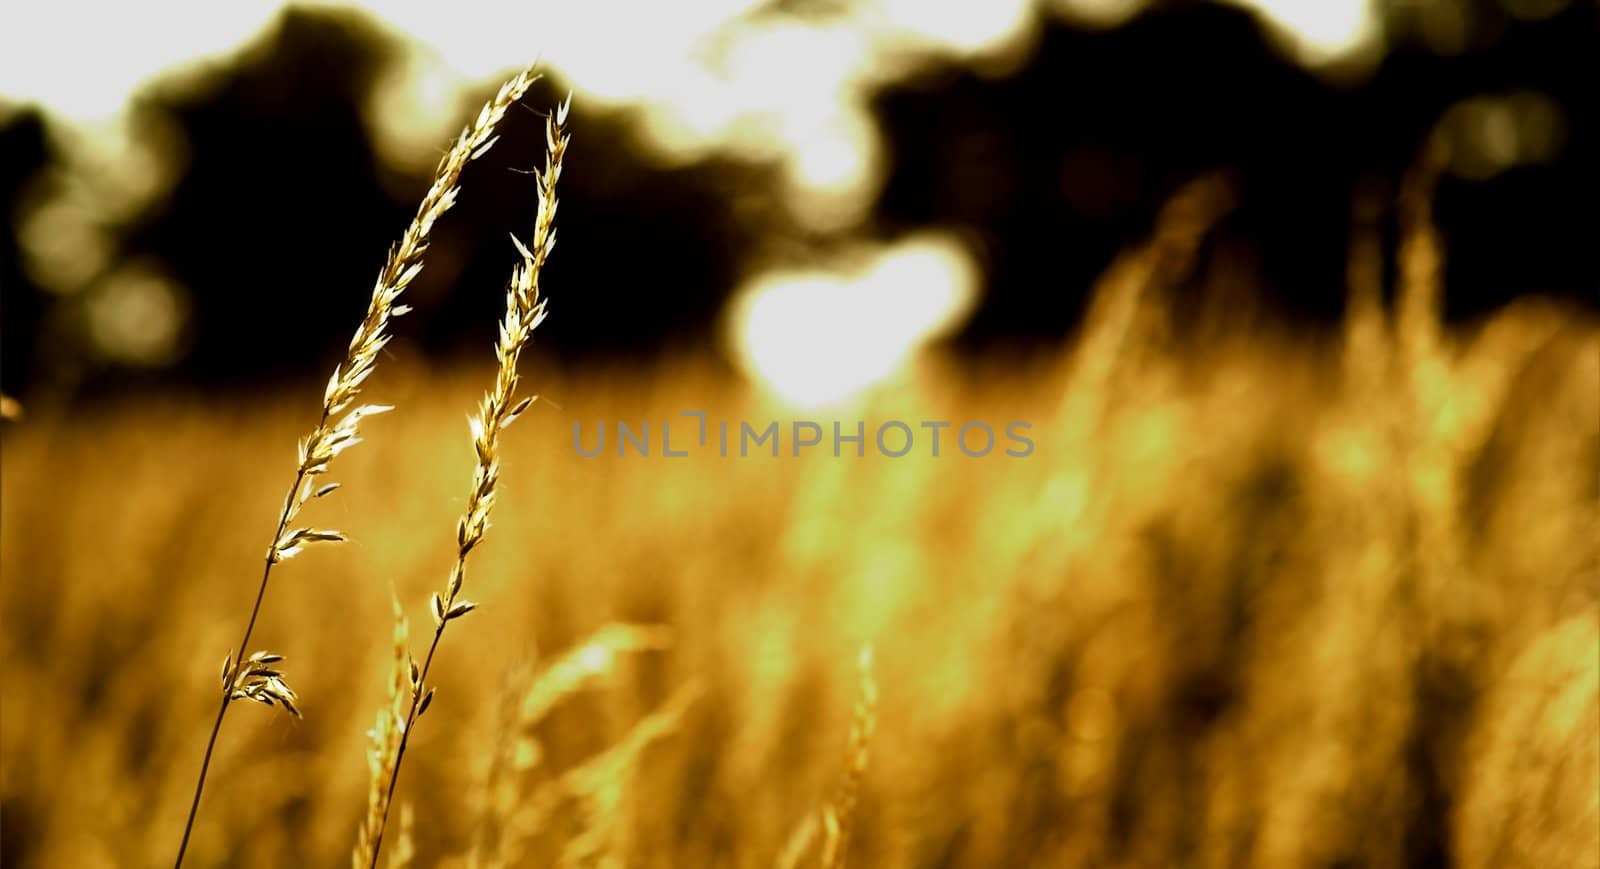 Shafts of wheat in a summer field.